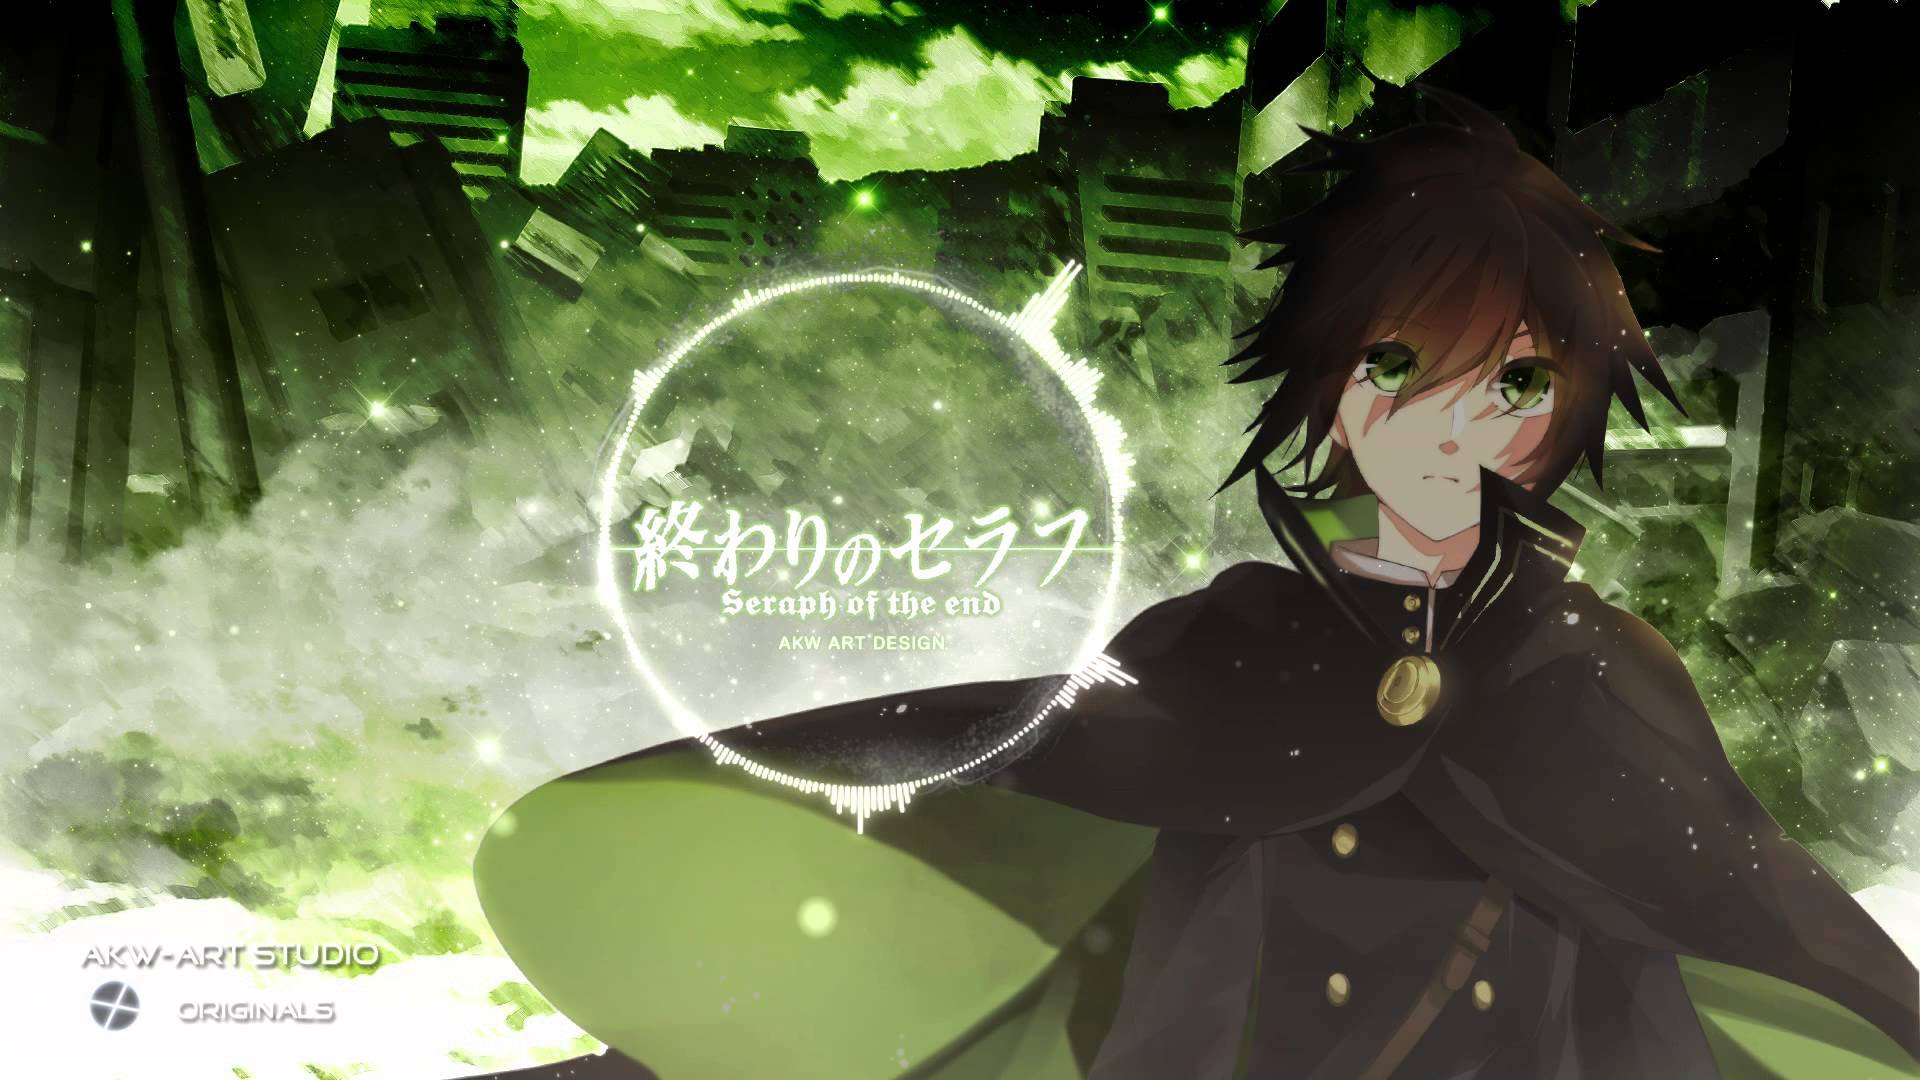 542320 1920x1355 Free desktop seraph of the end  Rare Gallery HD Wallpapers